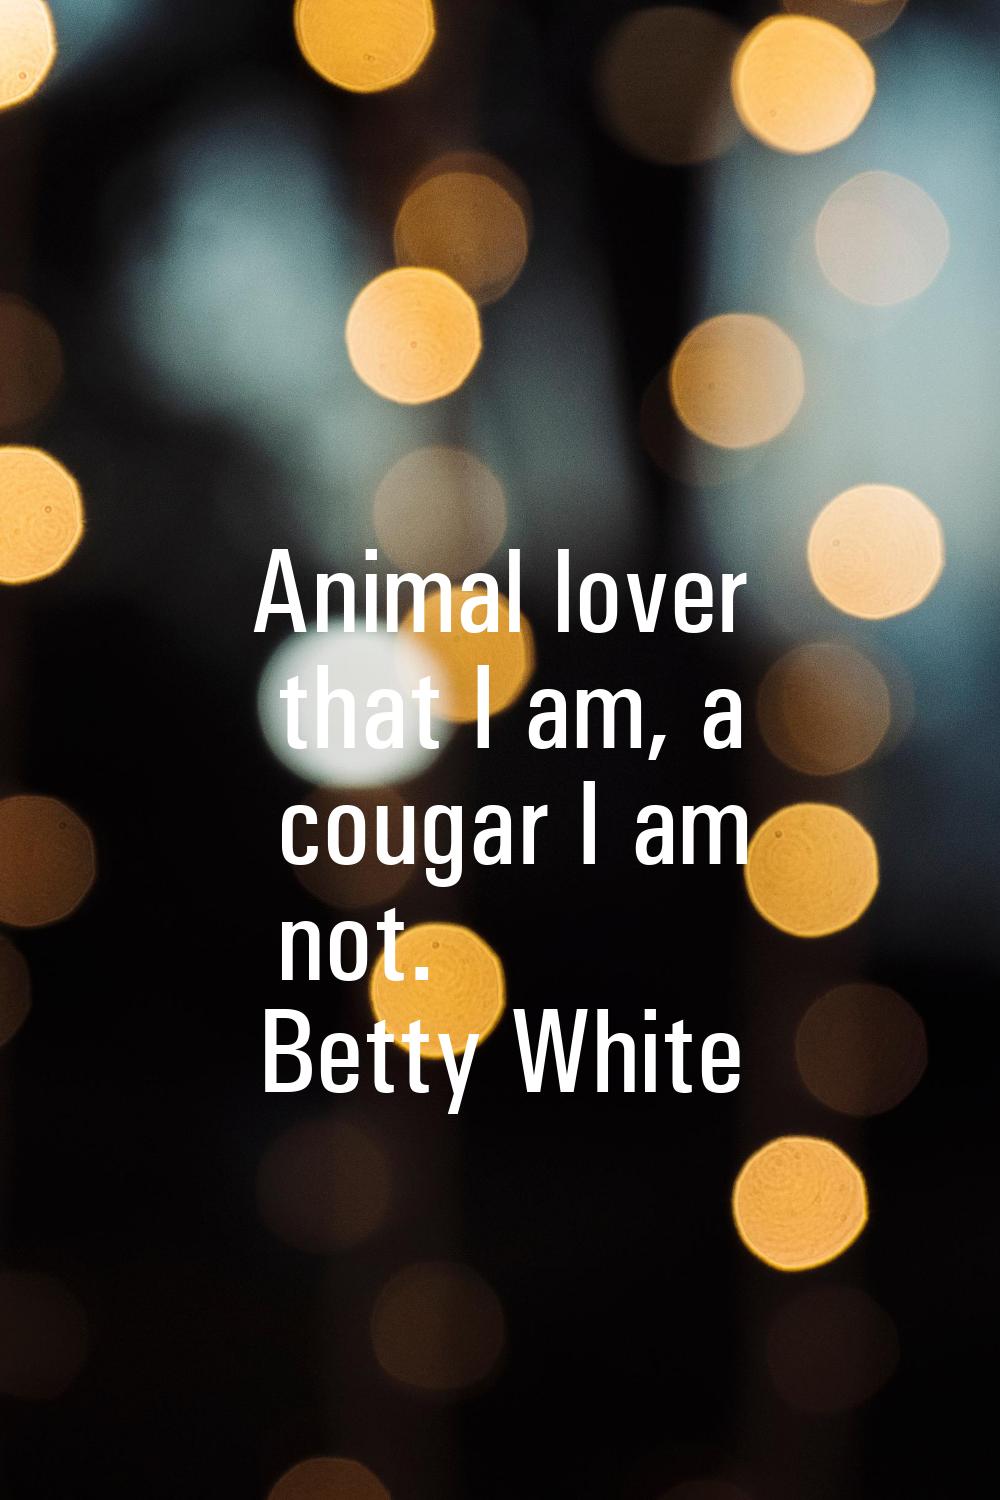 Animal lover that I am, a cougar I am not.